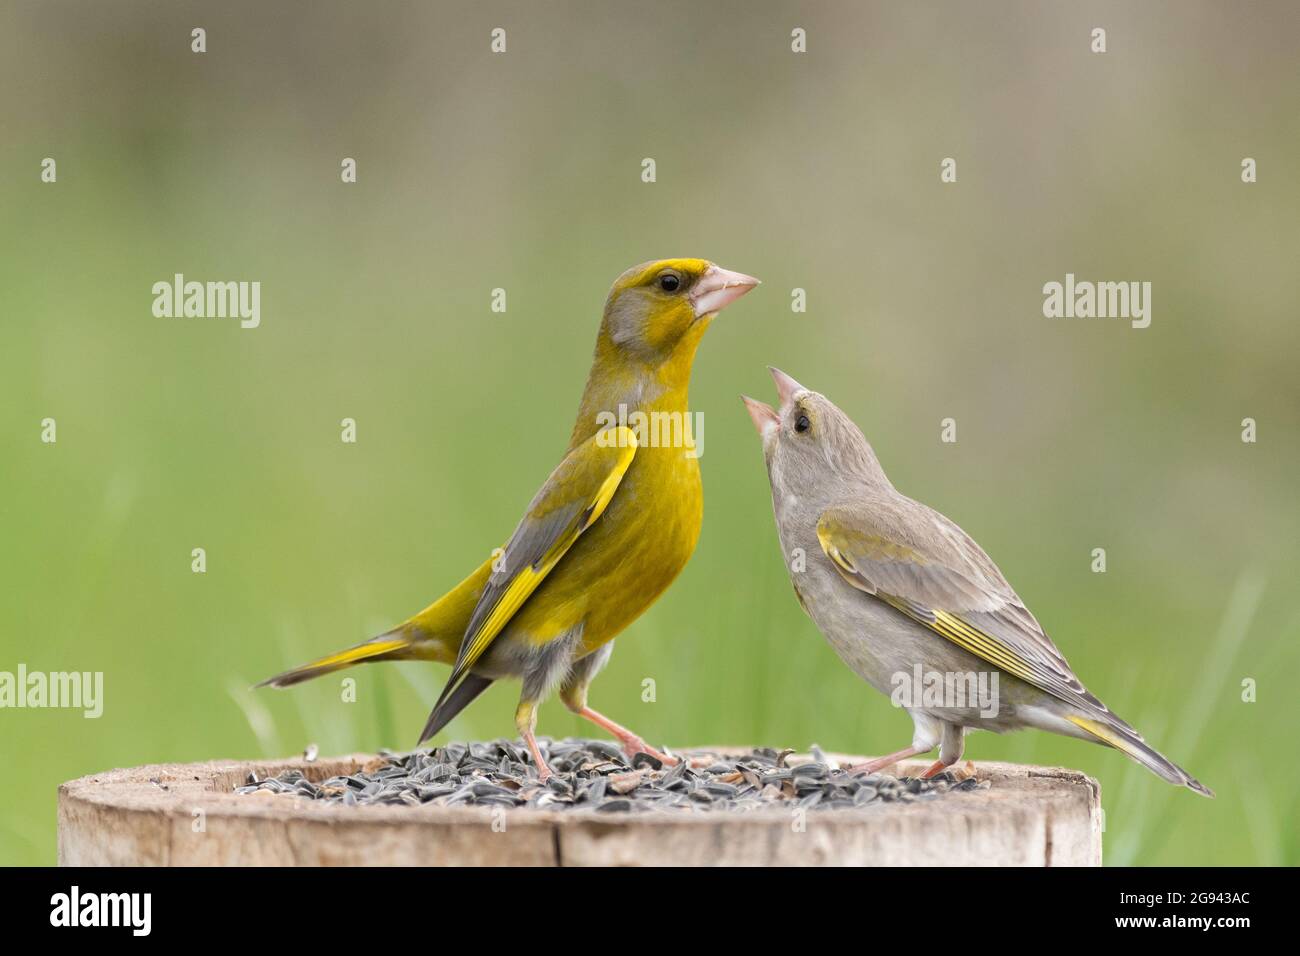 Male and female greenfinch Carduelis chloris. Bird Feeder. Stock Photo